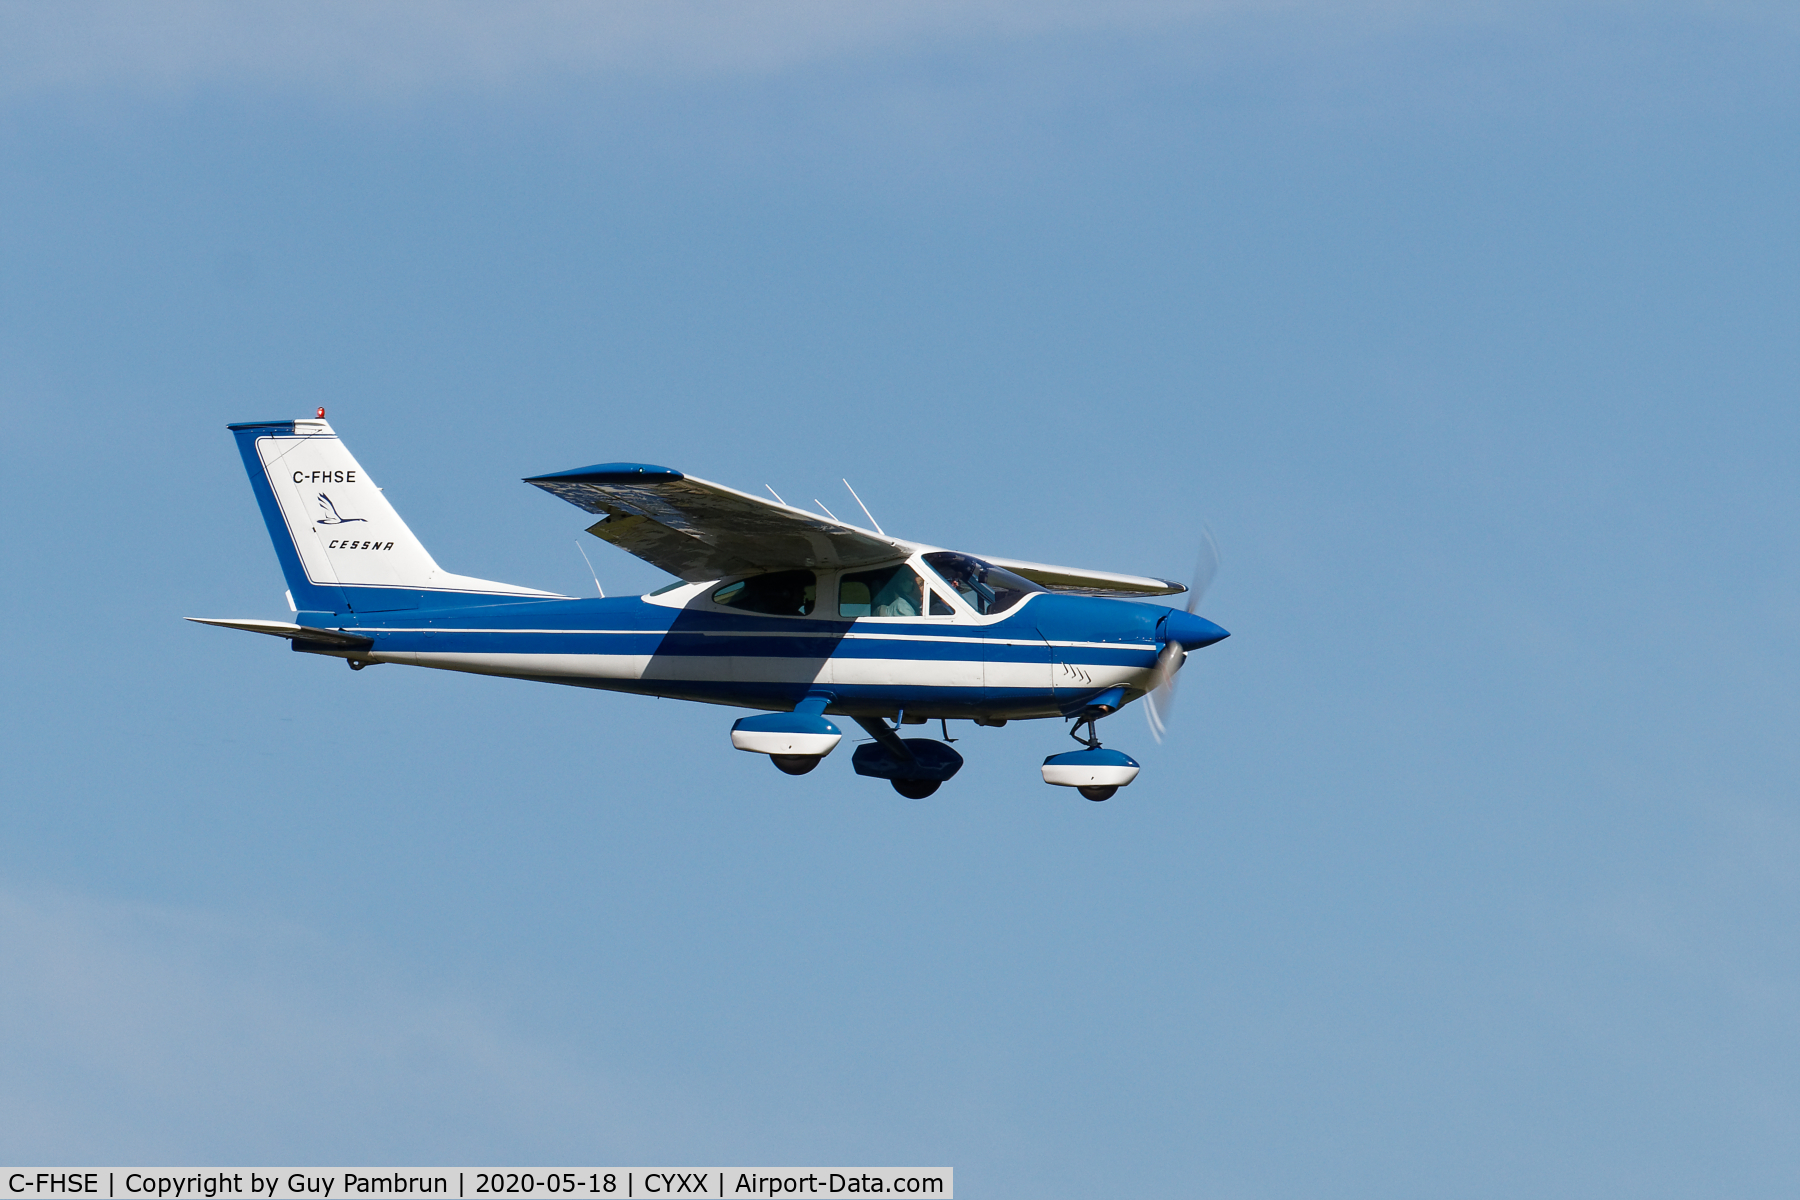 C-FHSE, 1968 Cessna 177 Cardinal C/N 17700206, Landing on 19 for pilot briefing and departure to take part in 